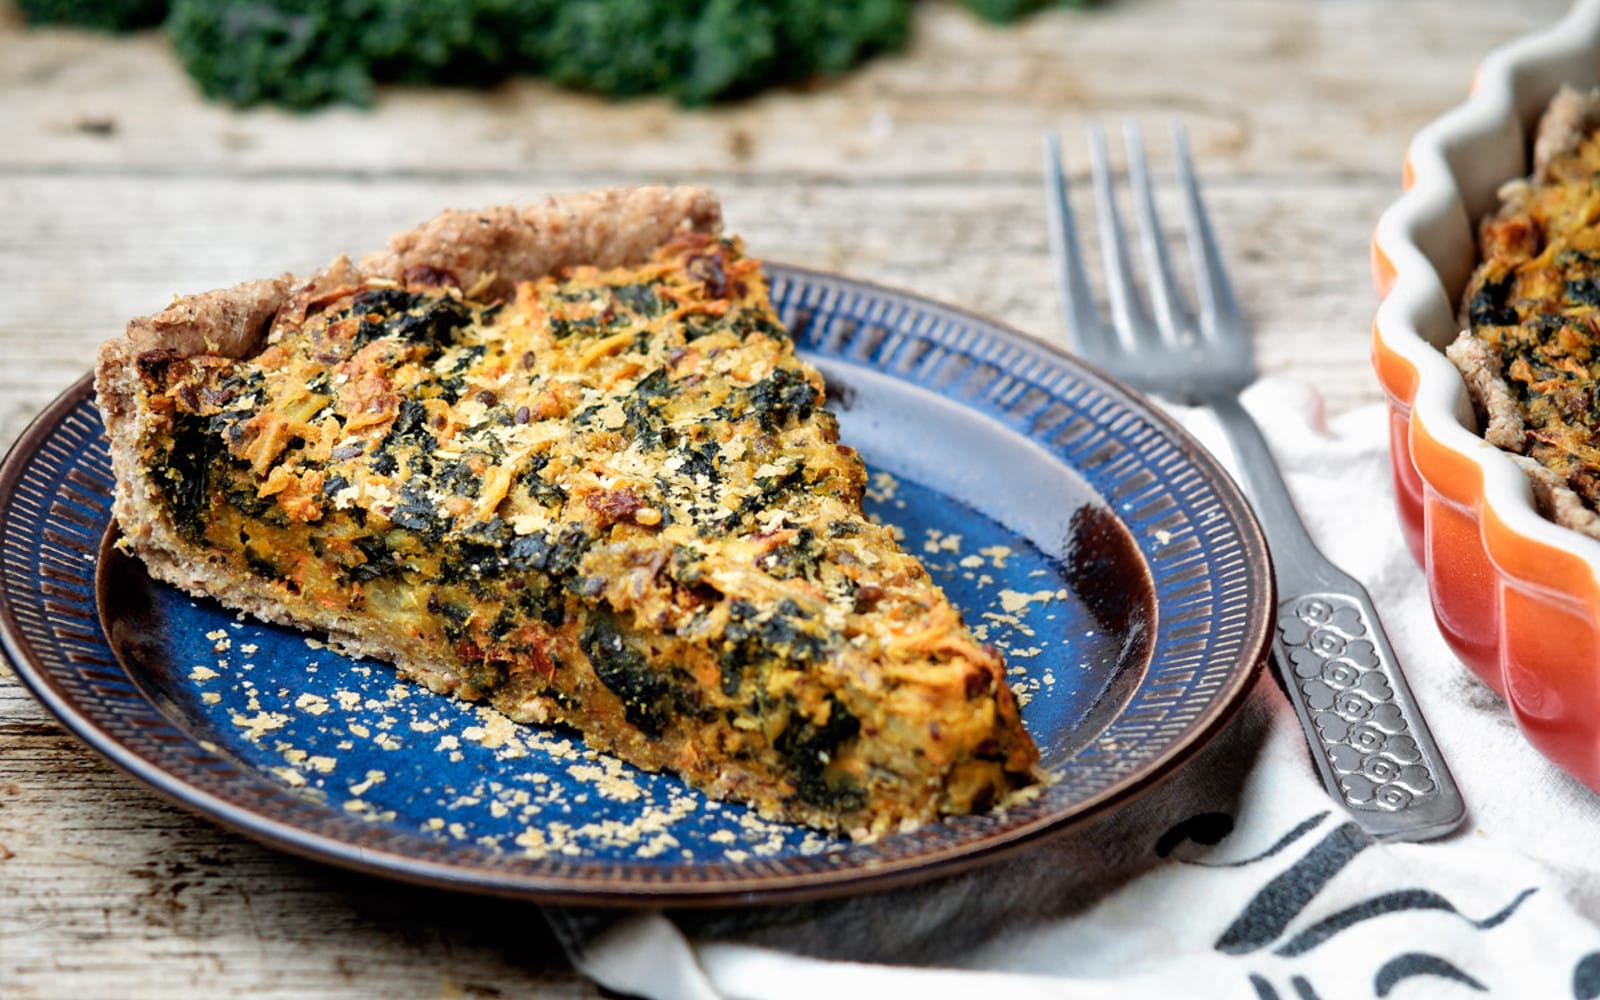 Eggless chickpea and kale quiche